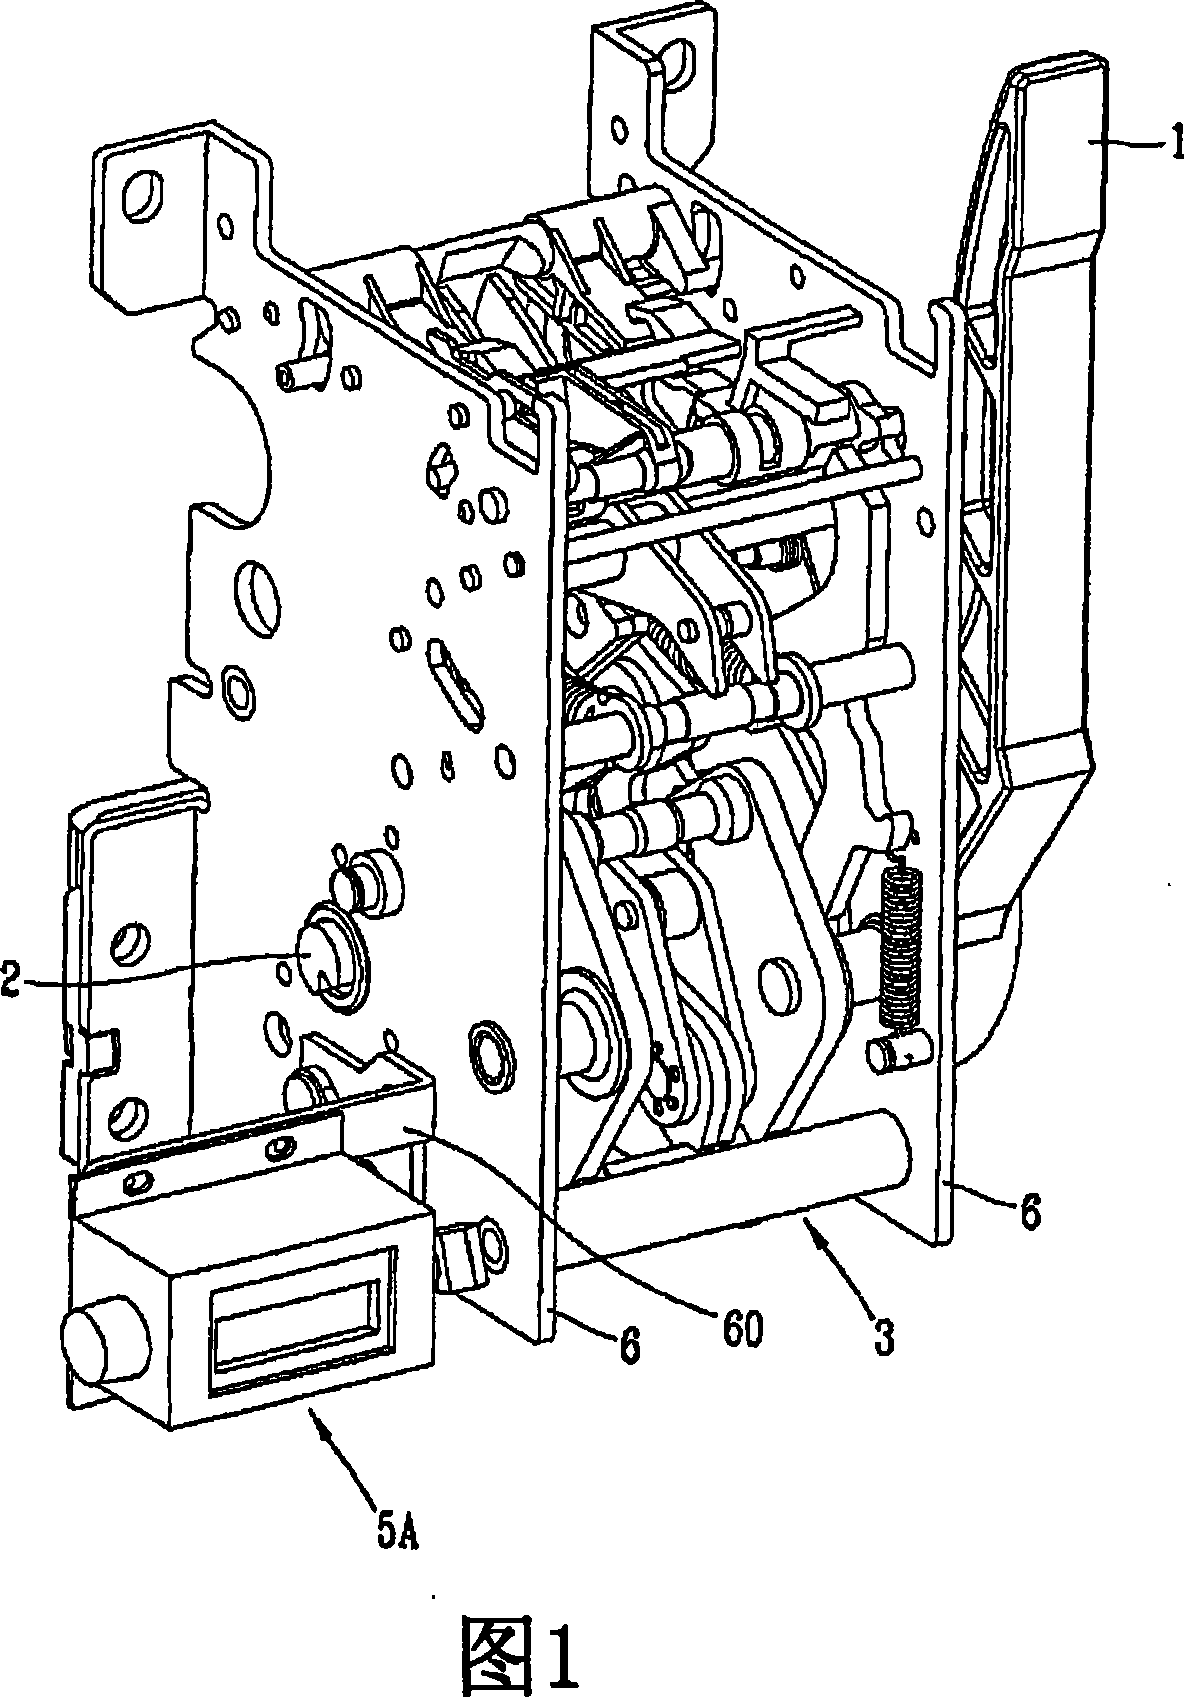 Operation counter driving apparatus for air circuit breaker